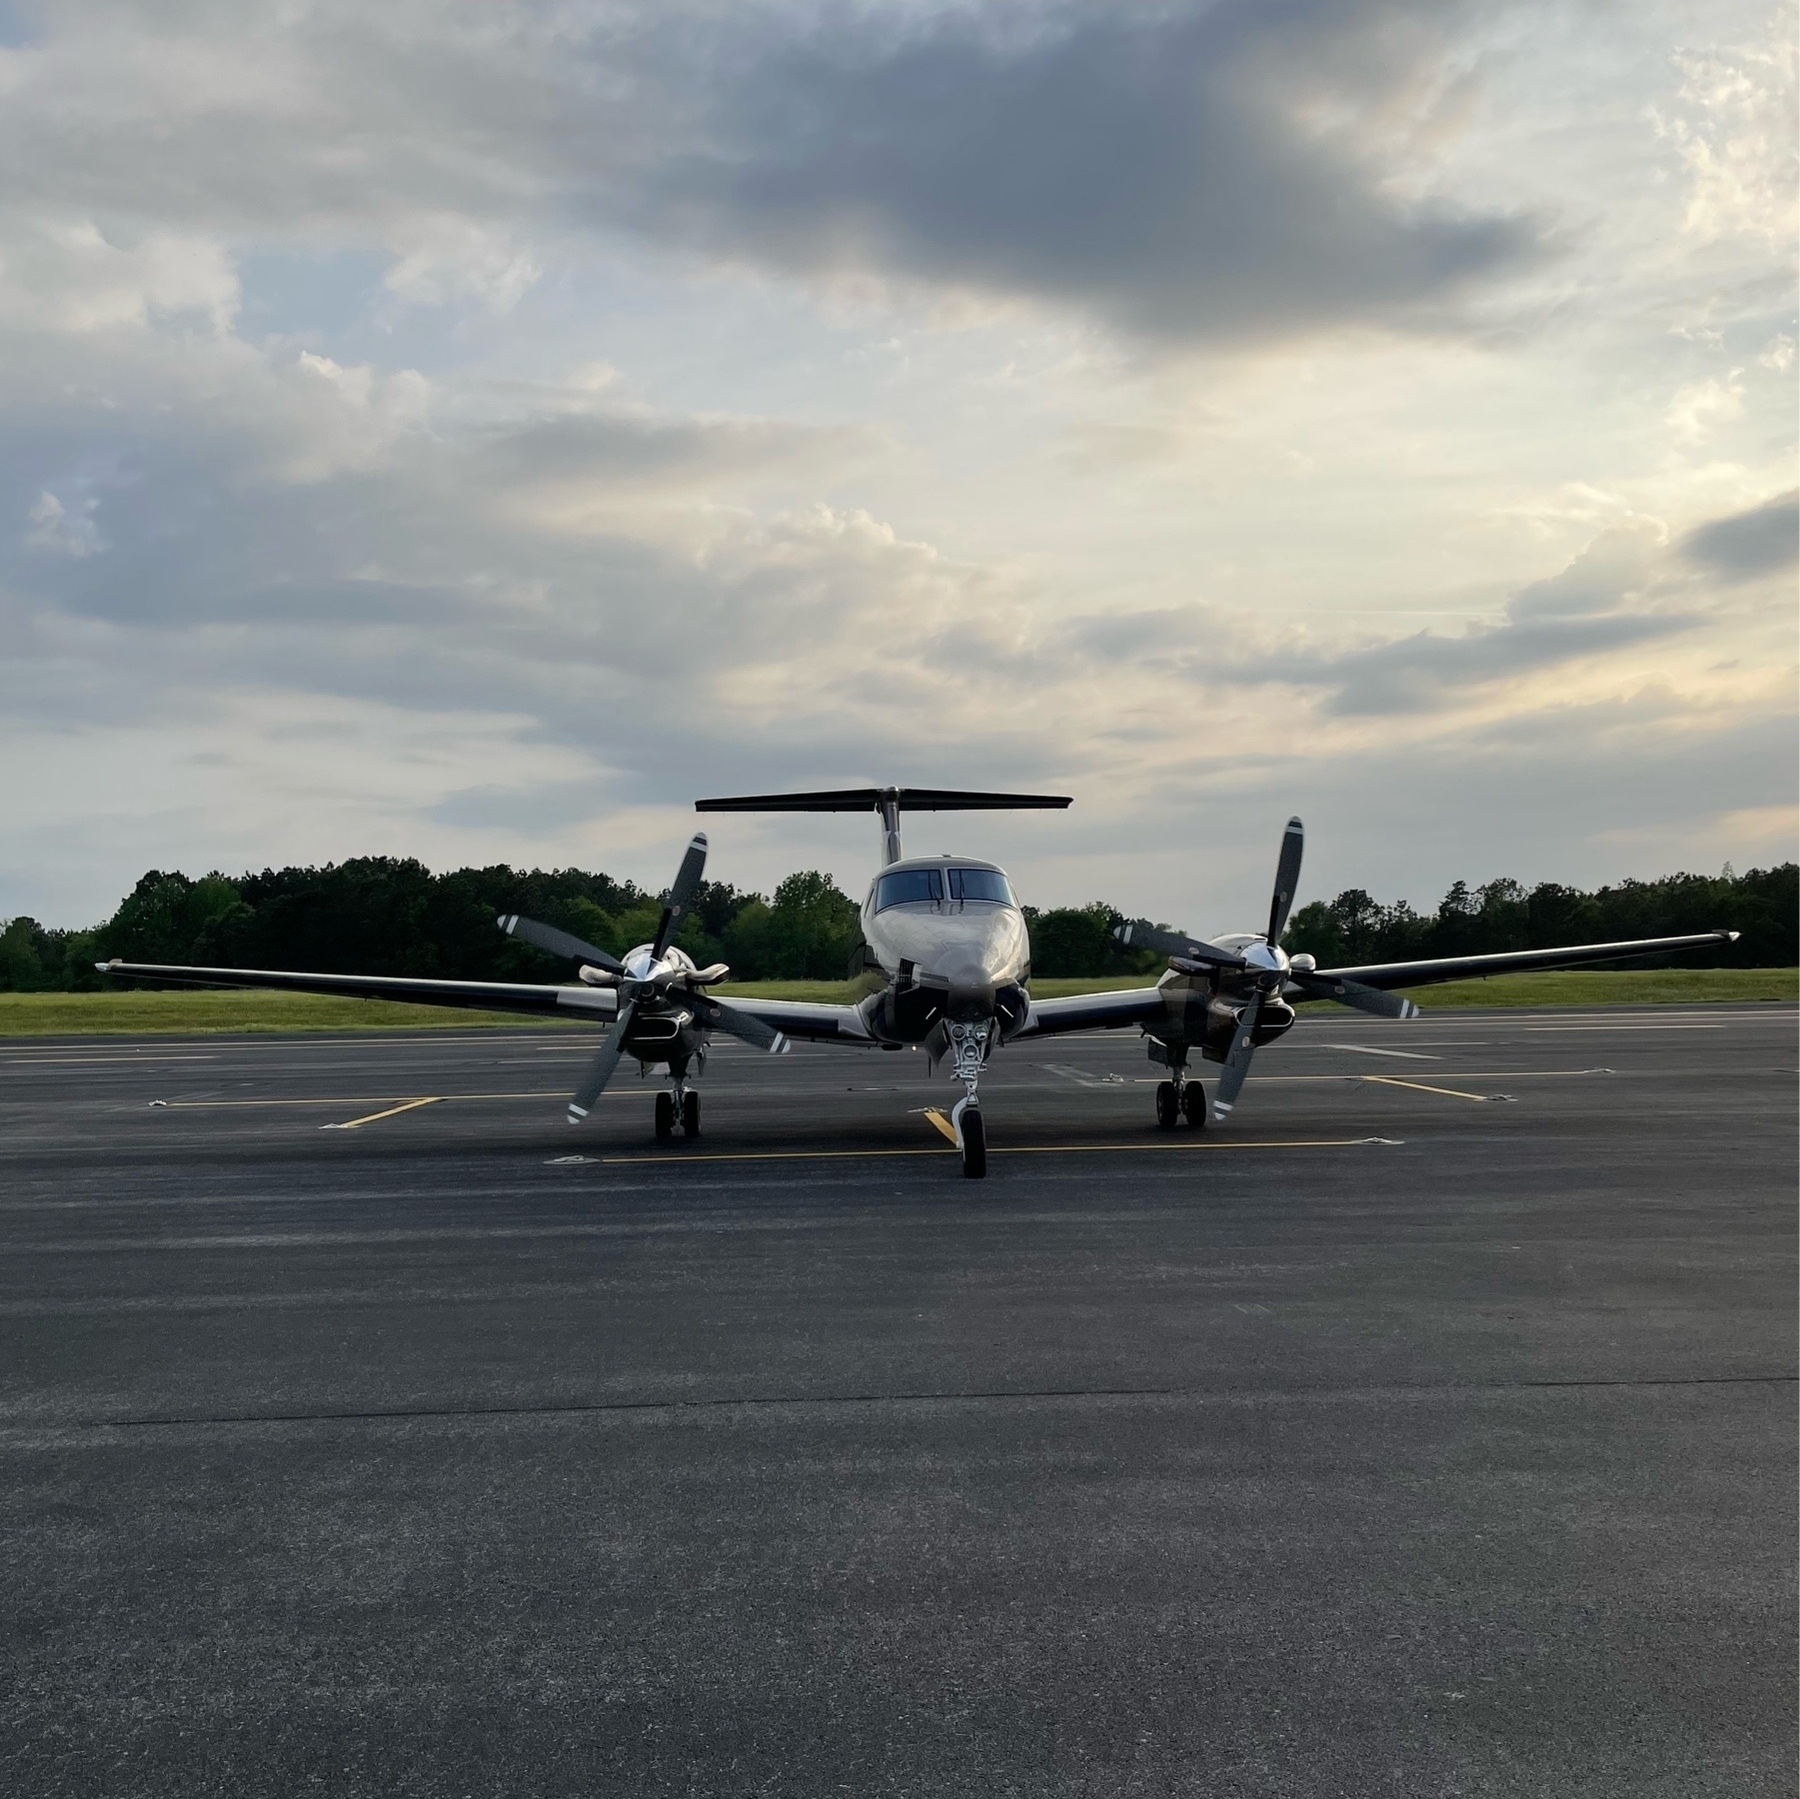 King Air 300 on the ramp